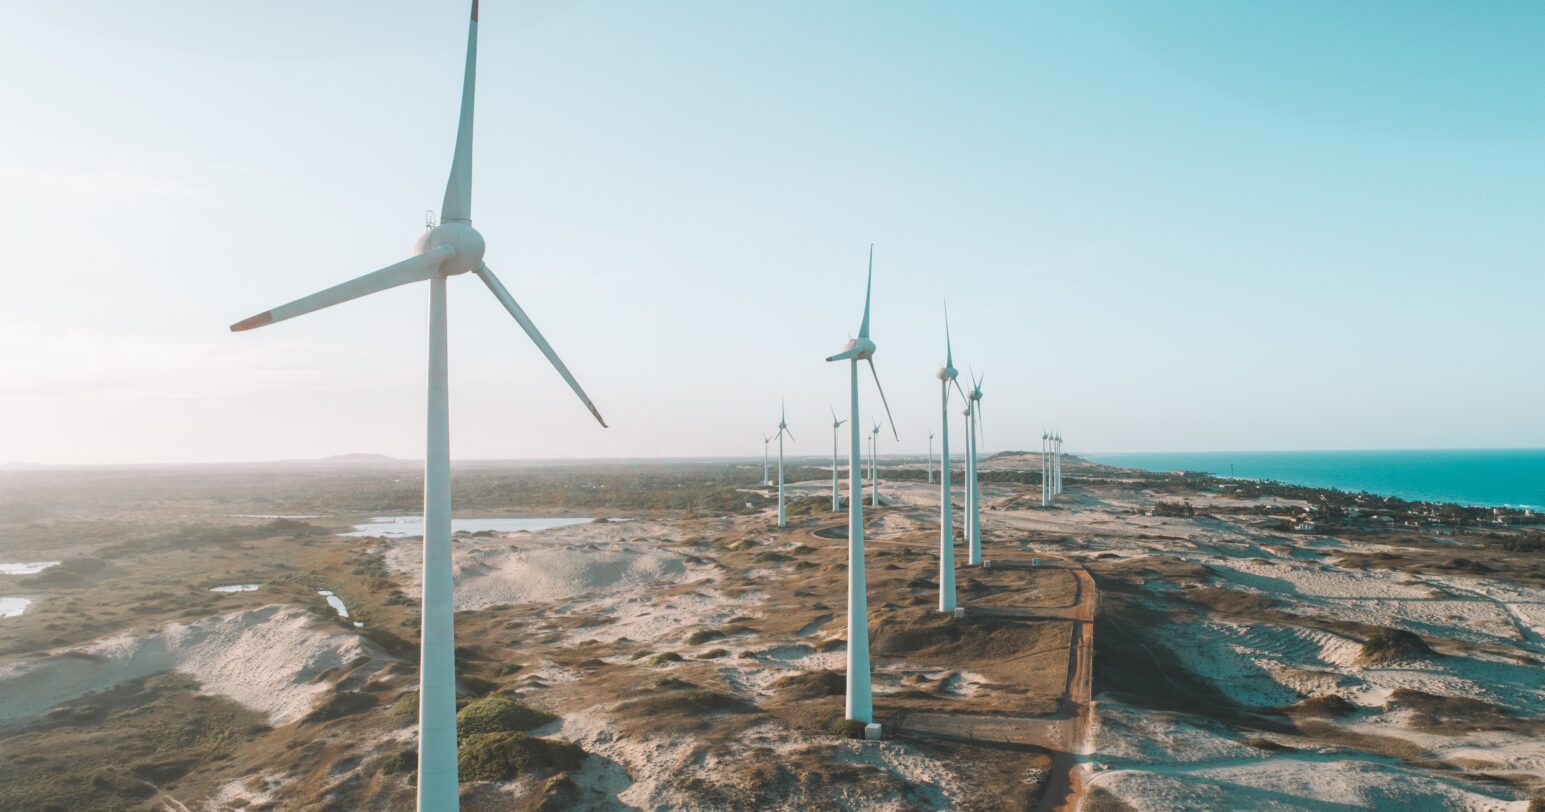 View of wind turbines along a beach.